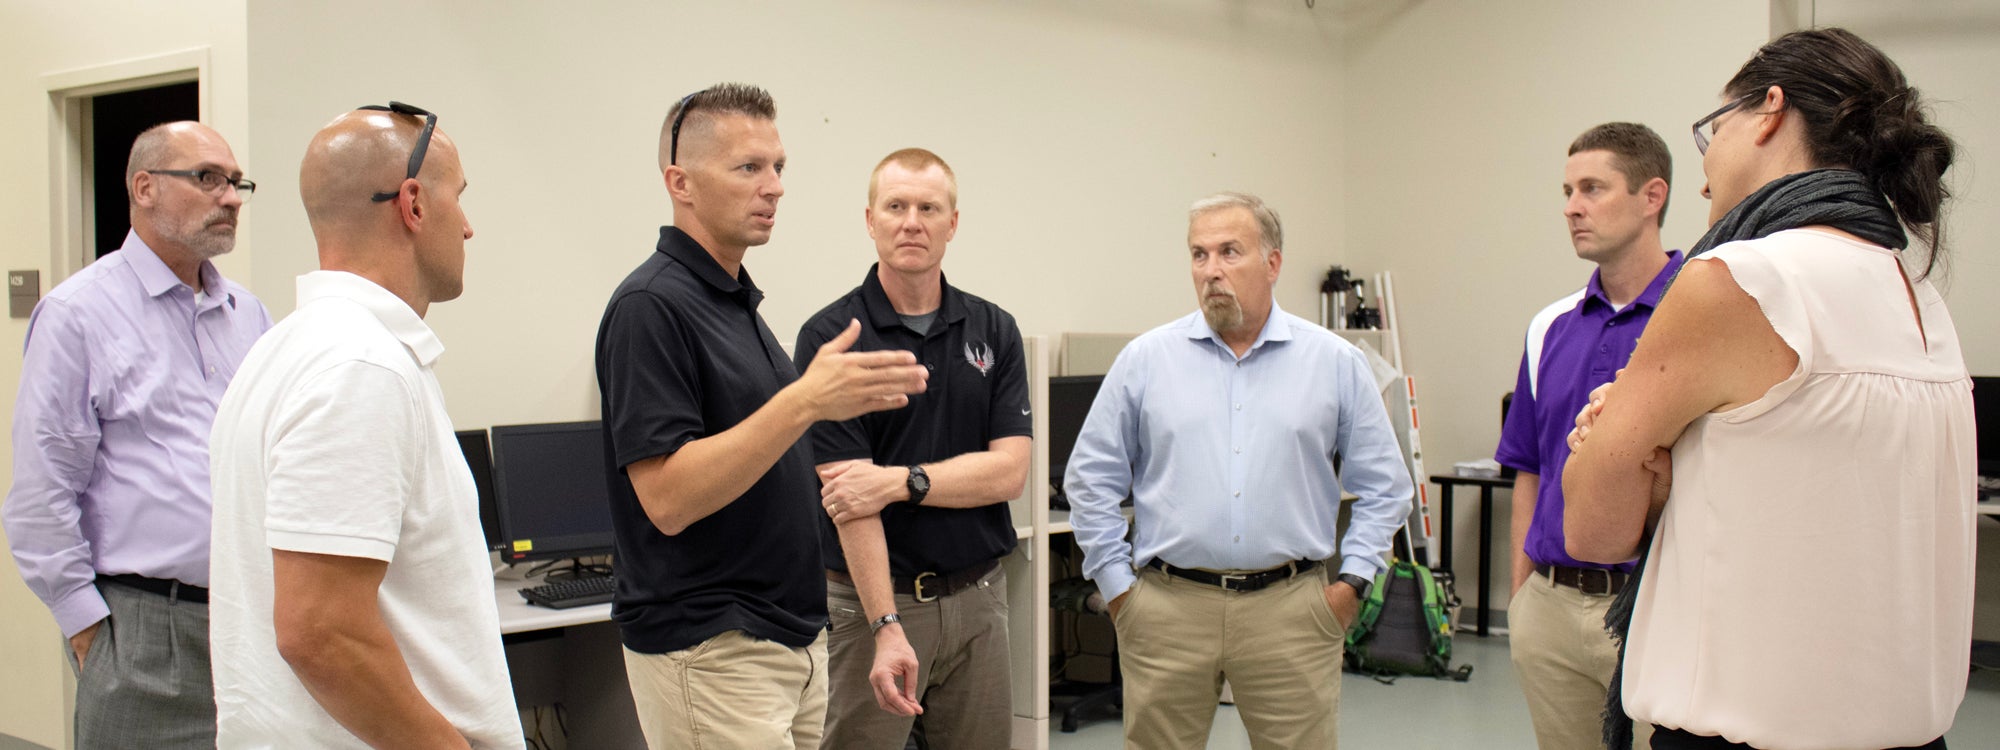 A group from the Air Force 724th Special Tactics Group discusses possible research collaboration opportunities with researchers from East Carolina University’s Human Movement Analysis Lab during a tour on July 23. The group visited several ECU Health and Human Performance and Physical Therapy laboratories to examine assets that could help support their airmen and medical staff.